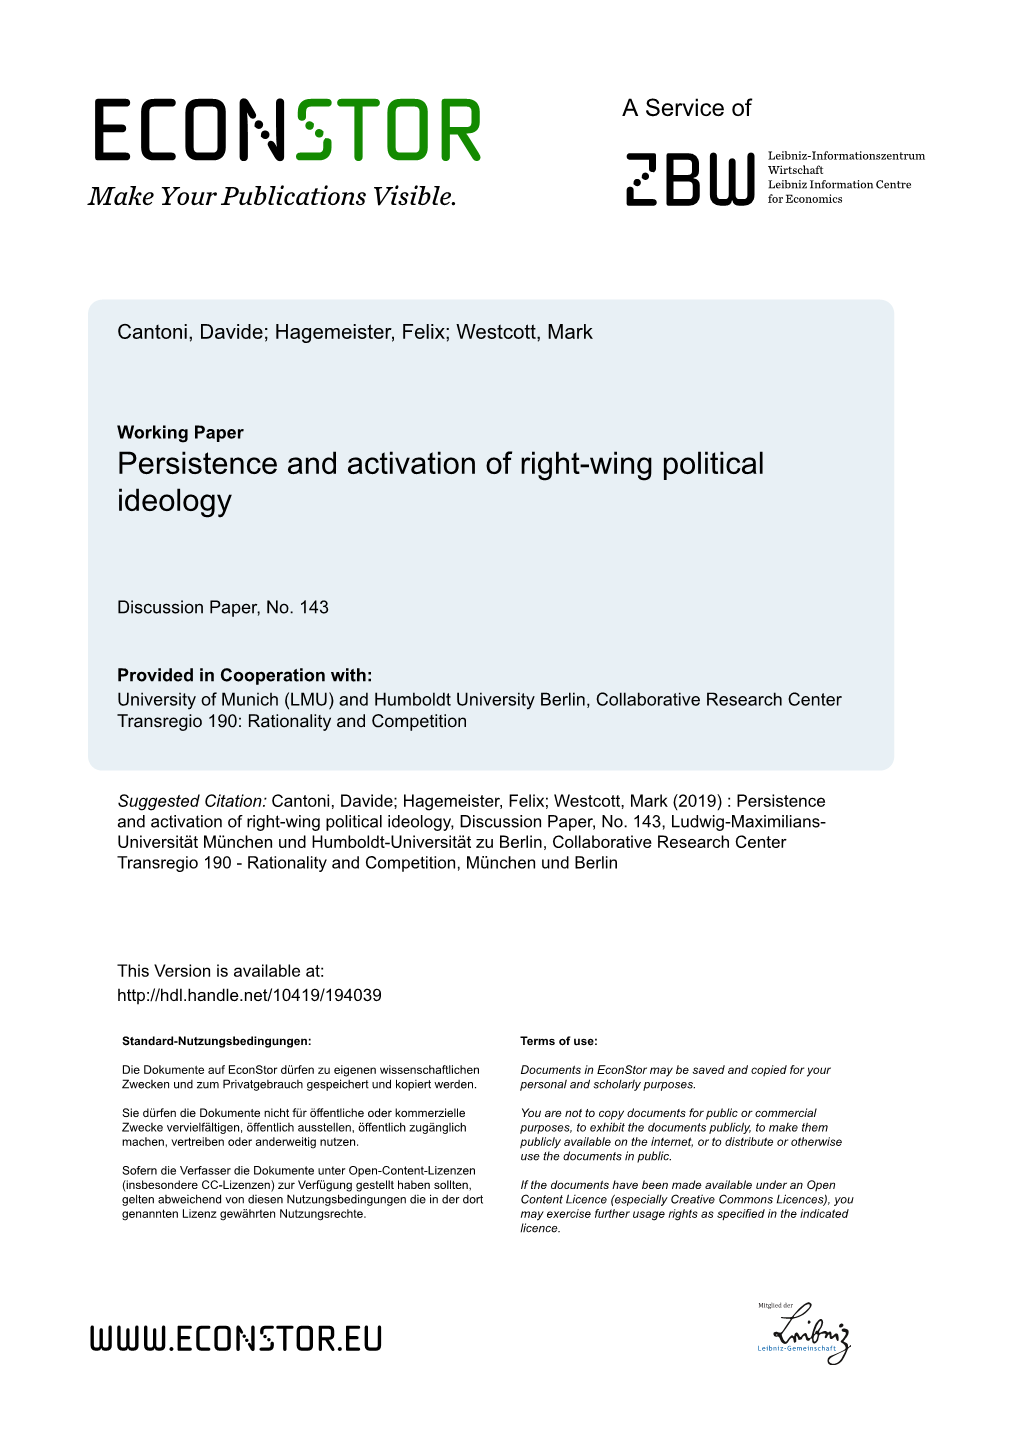 Persistence and Activation of Right-Wing Political Ideology